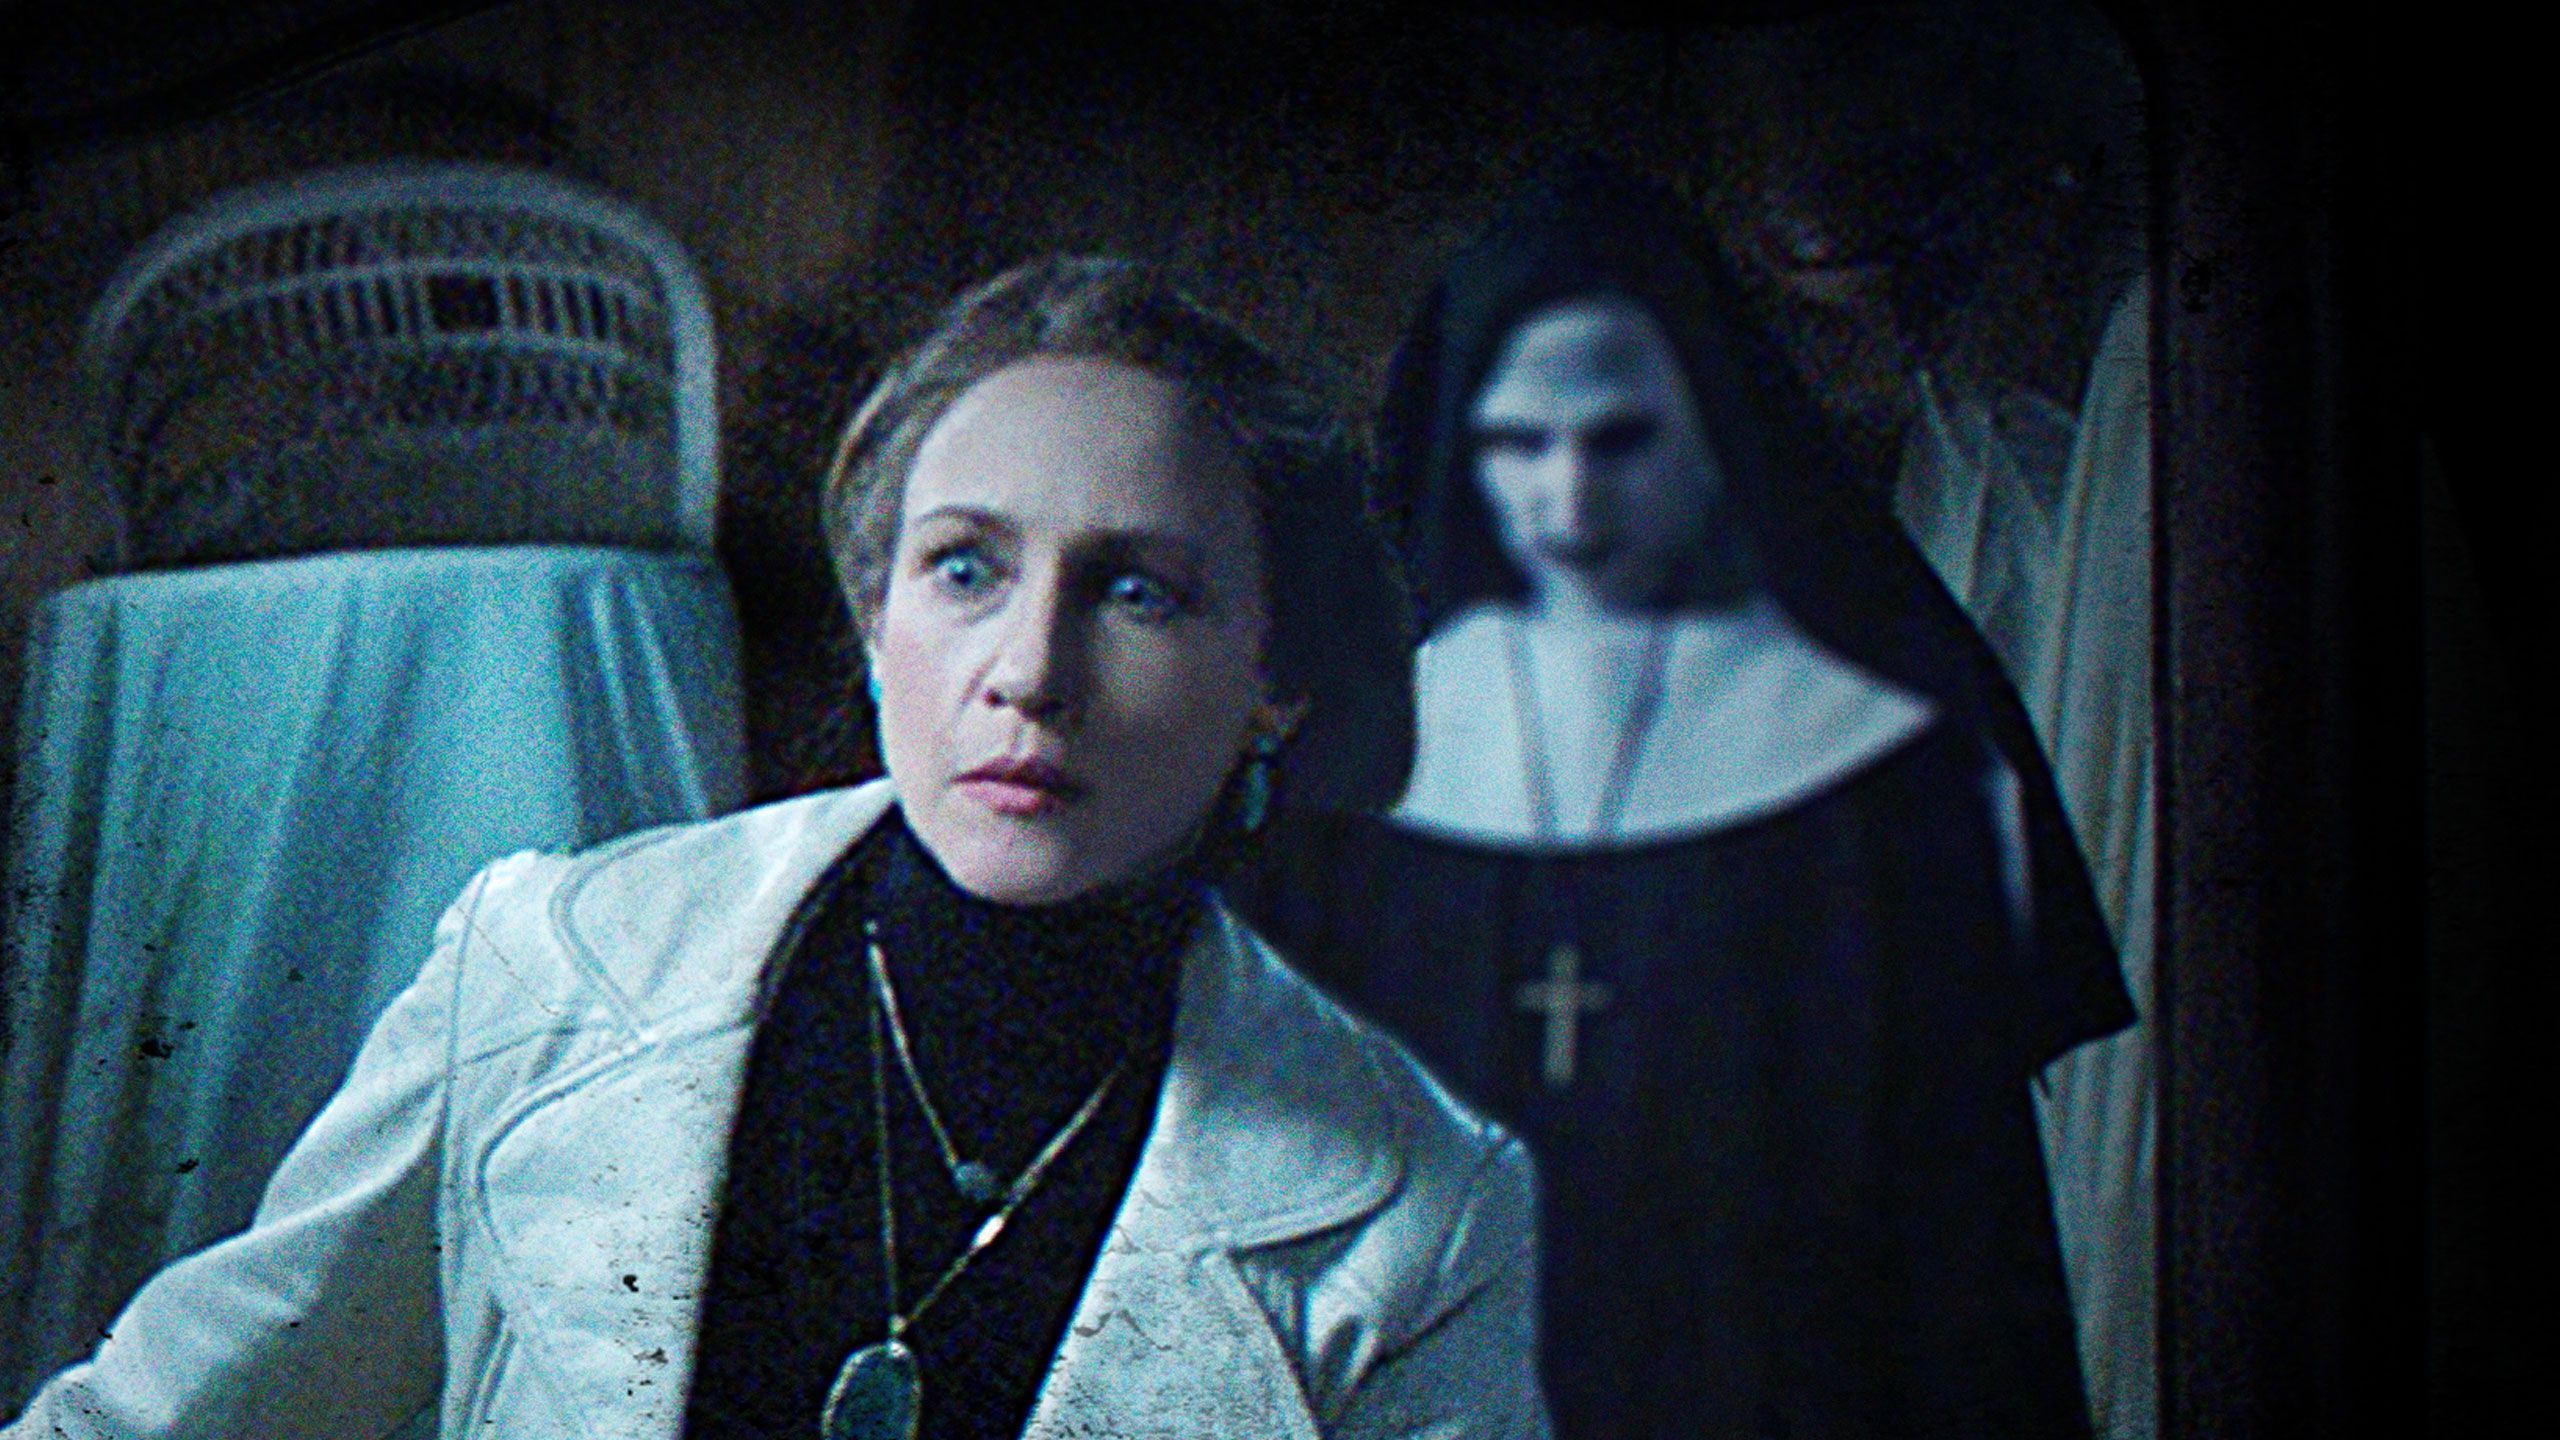 conjuring 2 full movie online free hd